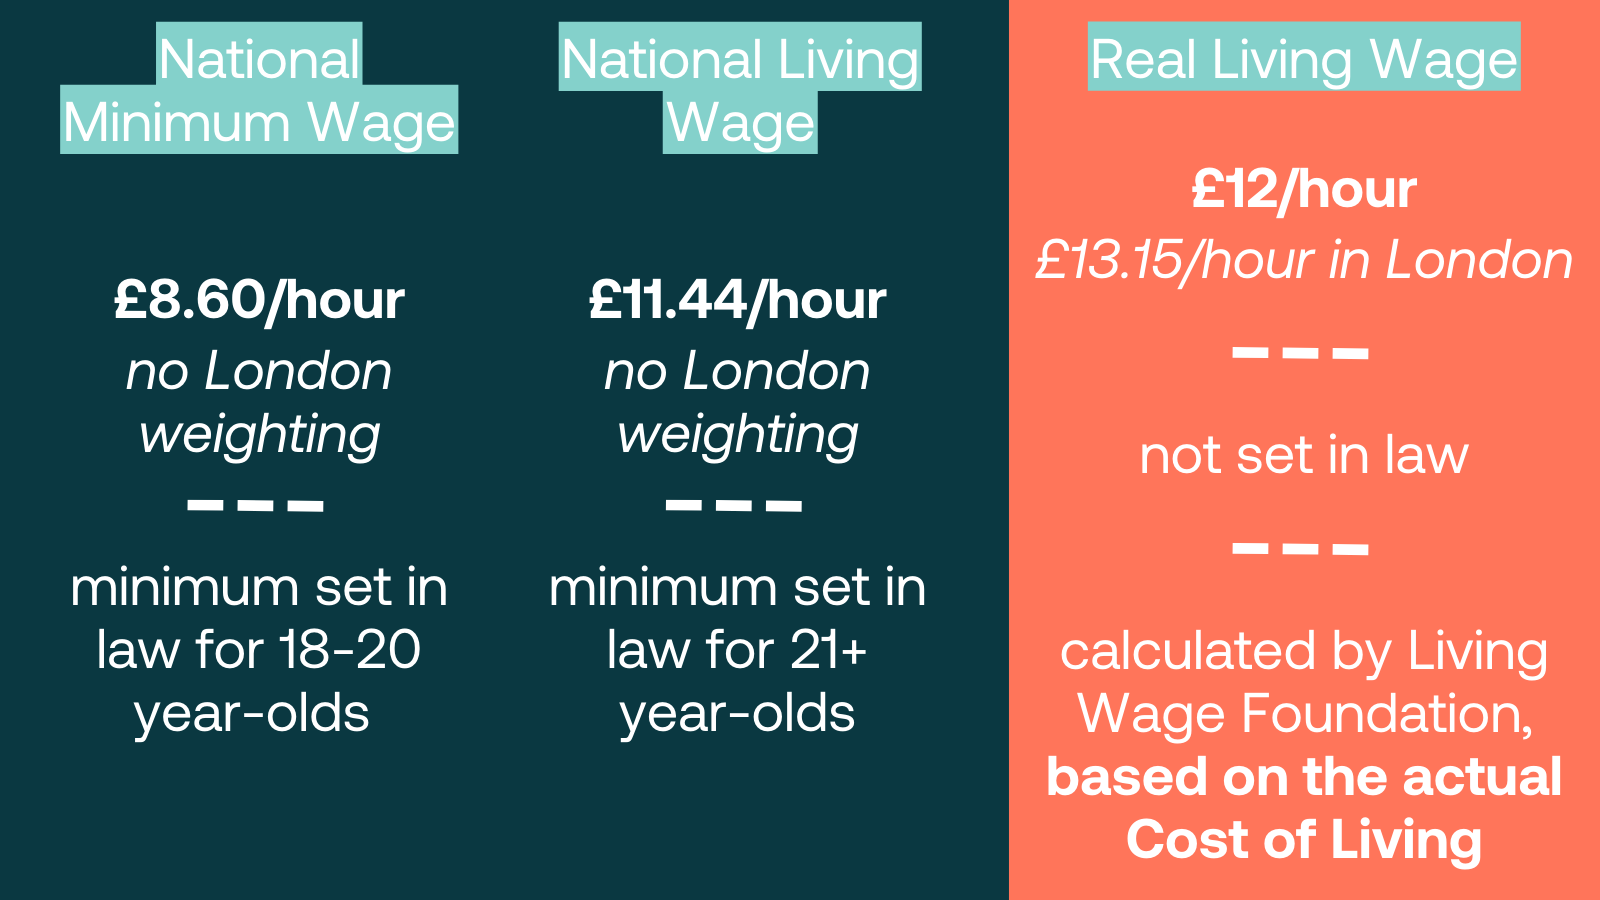 A graphic shows the difference between the National Minimum Wage, the National Living Wage and the Real Living Wage. National Minimum Wage is £8.60 an hour with no London weighting - set in law for 18-20 year olds. The National Living Wage is £11.44 an hour with no London Weighting, and is set in law for 21+ year-olds. The real Living Wage is set at £12 an hour, £13.15 in London. It is not set in Law, calculated by Living Wage Foundation and based on the actual Cost of Living.